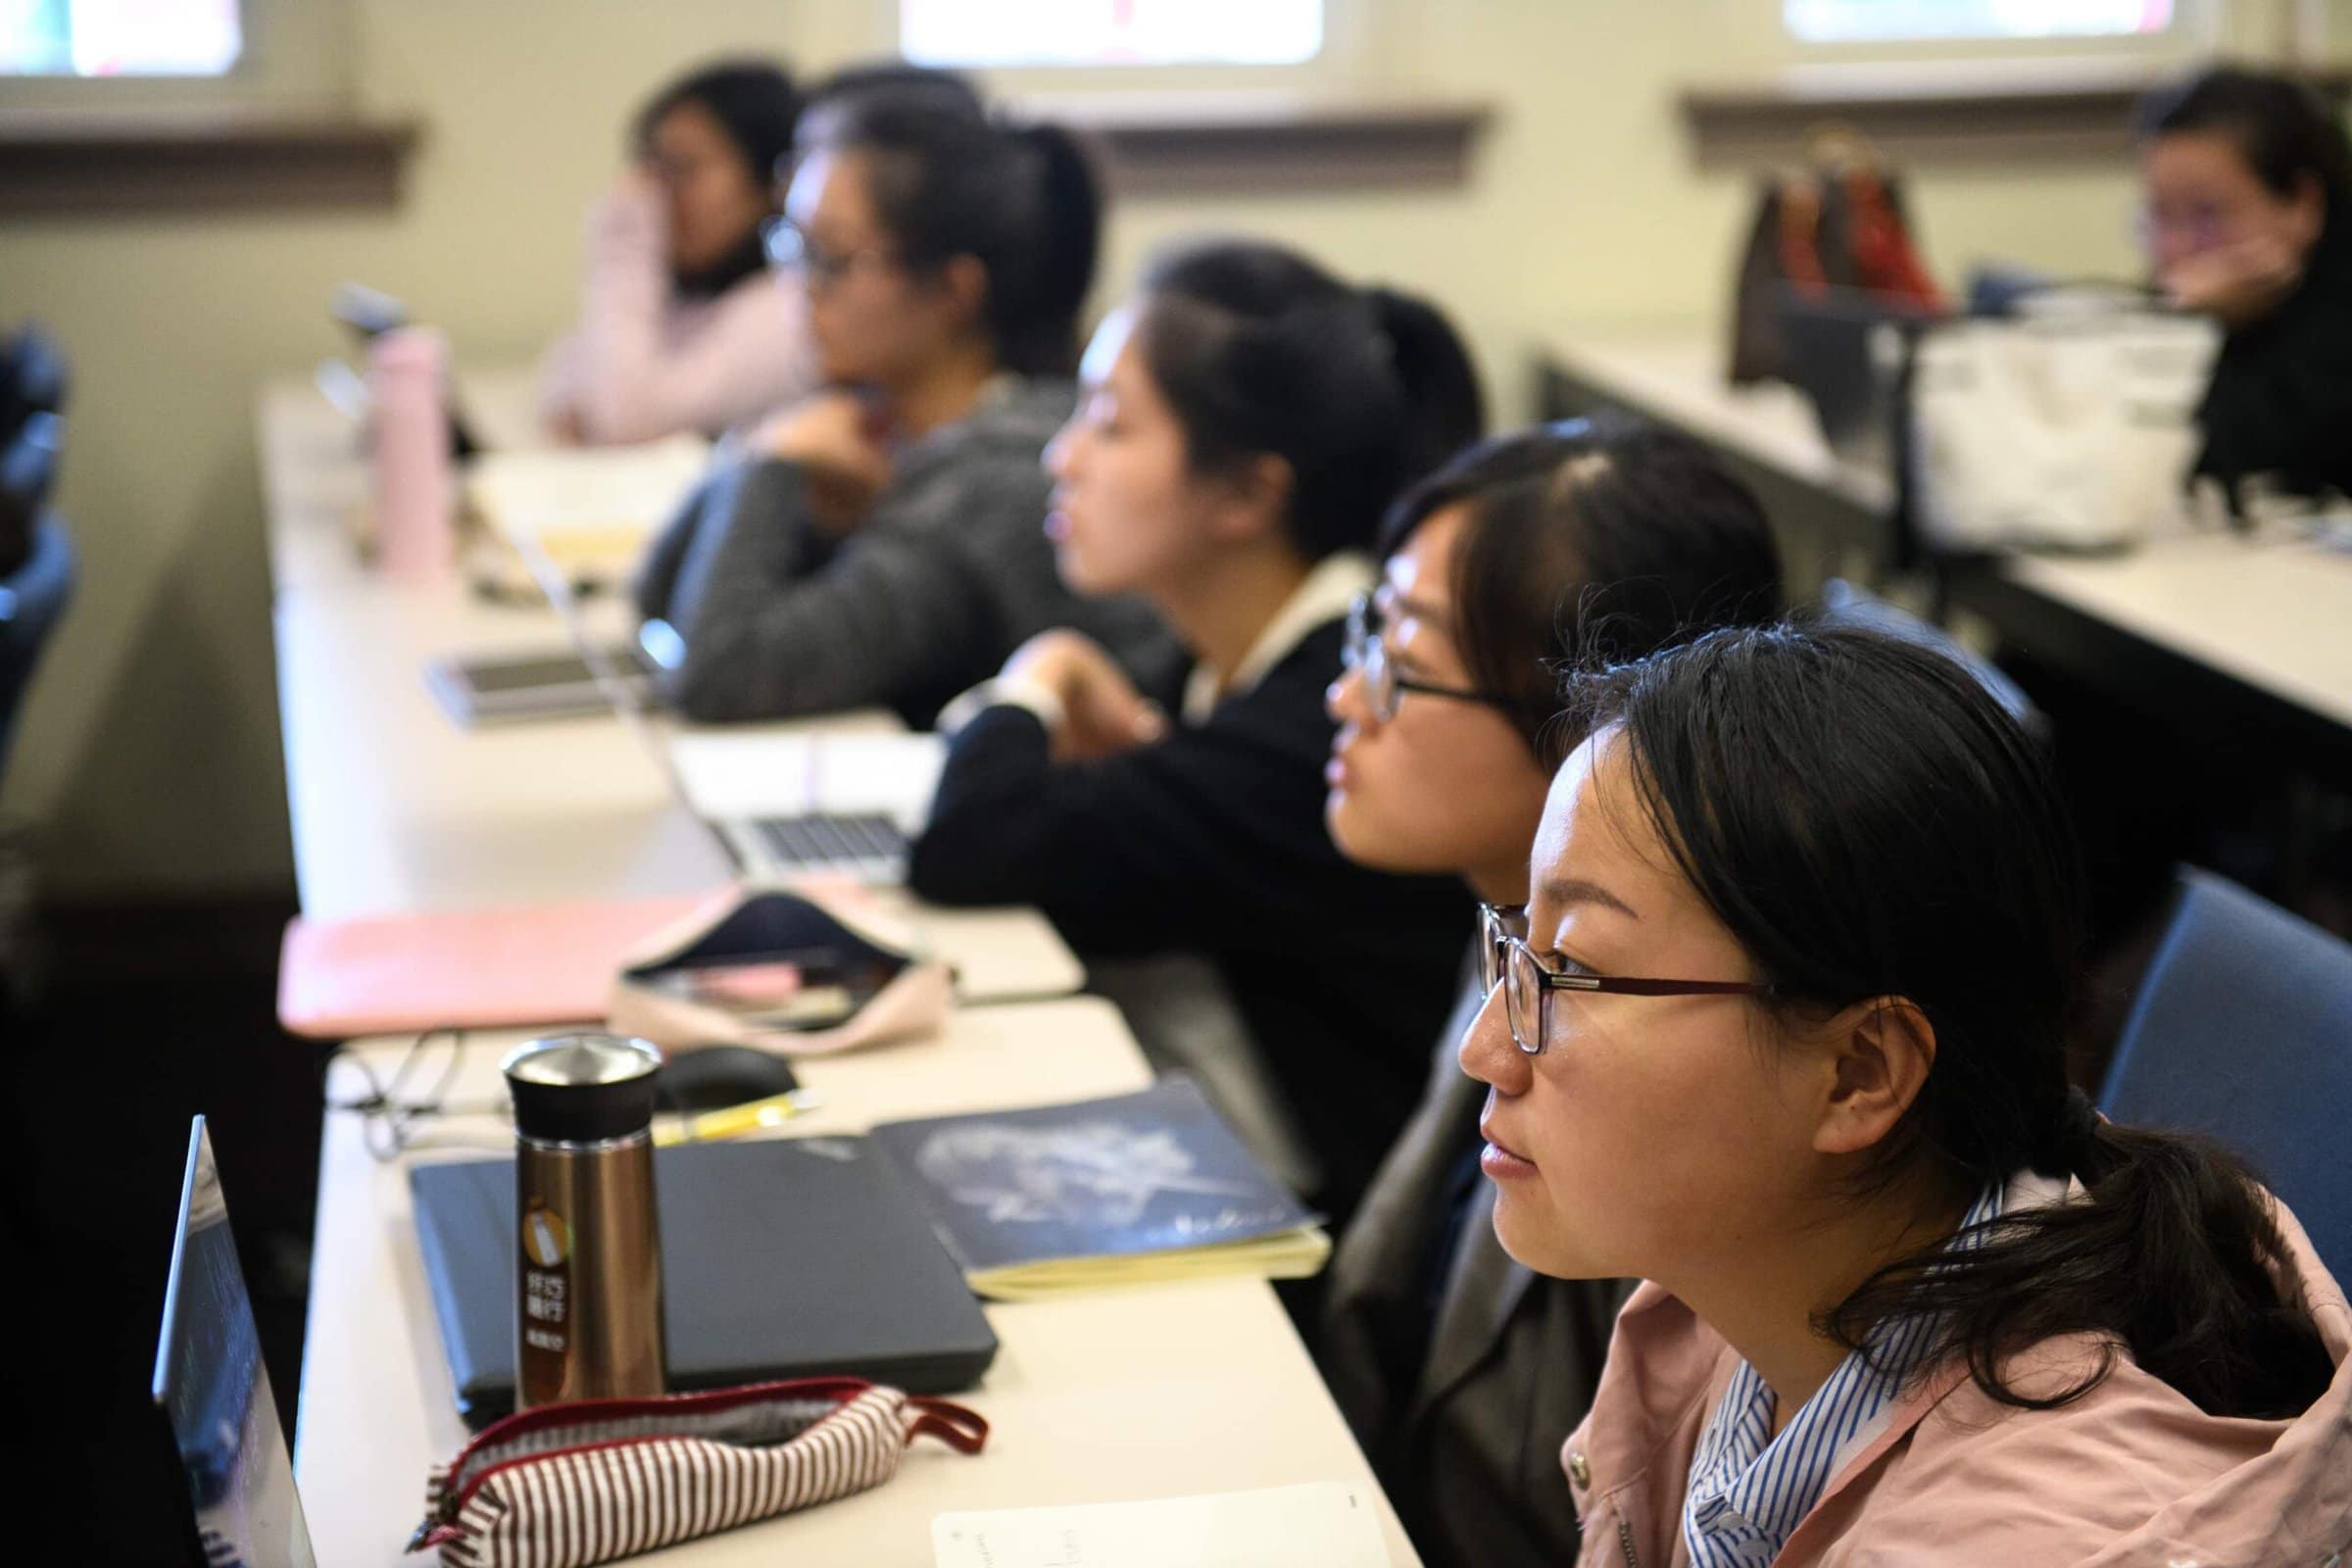 A class of 2+2 students from Anhui Normal University in Wuhu, China, listen to Maryem speak about her own experiences as a foreign student at Brenau University. (AJ Reynolds/Brenau University)